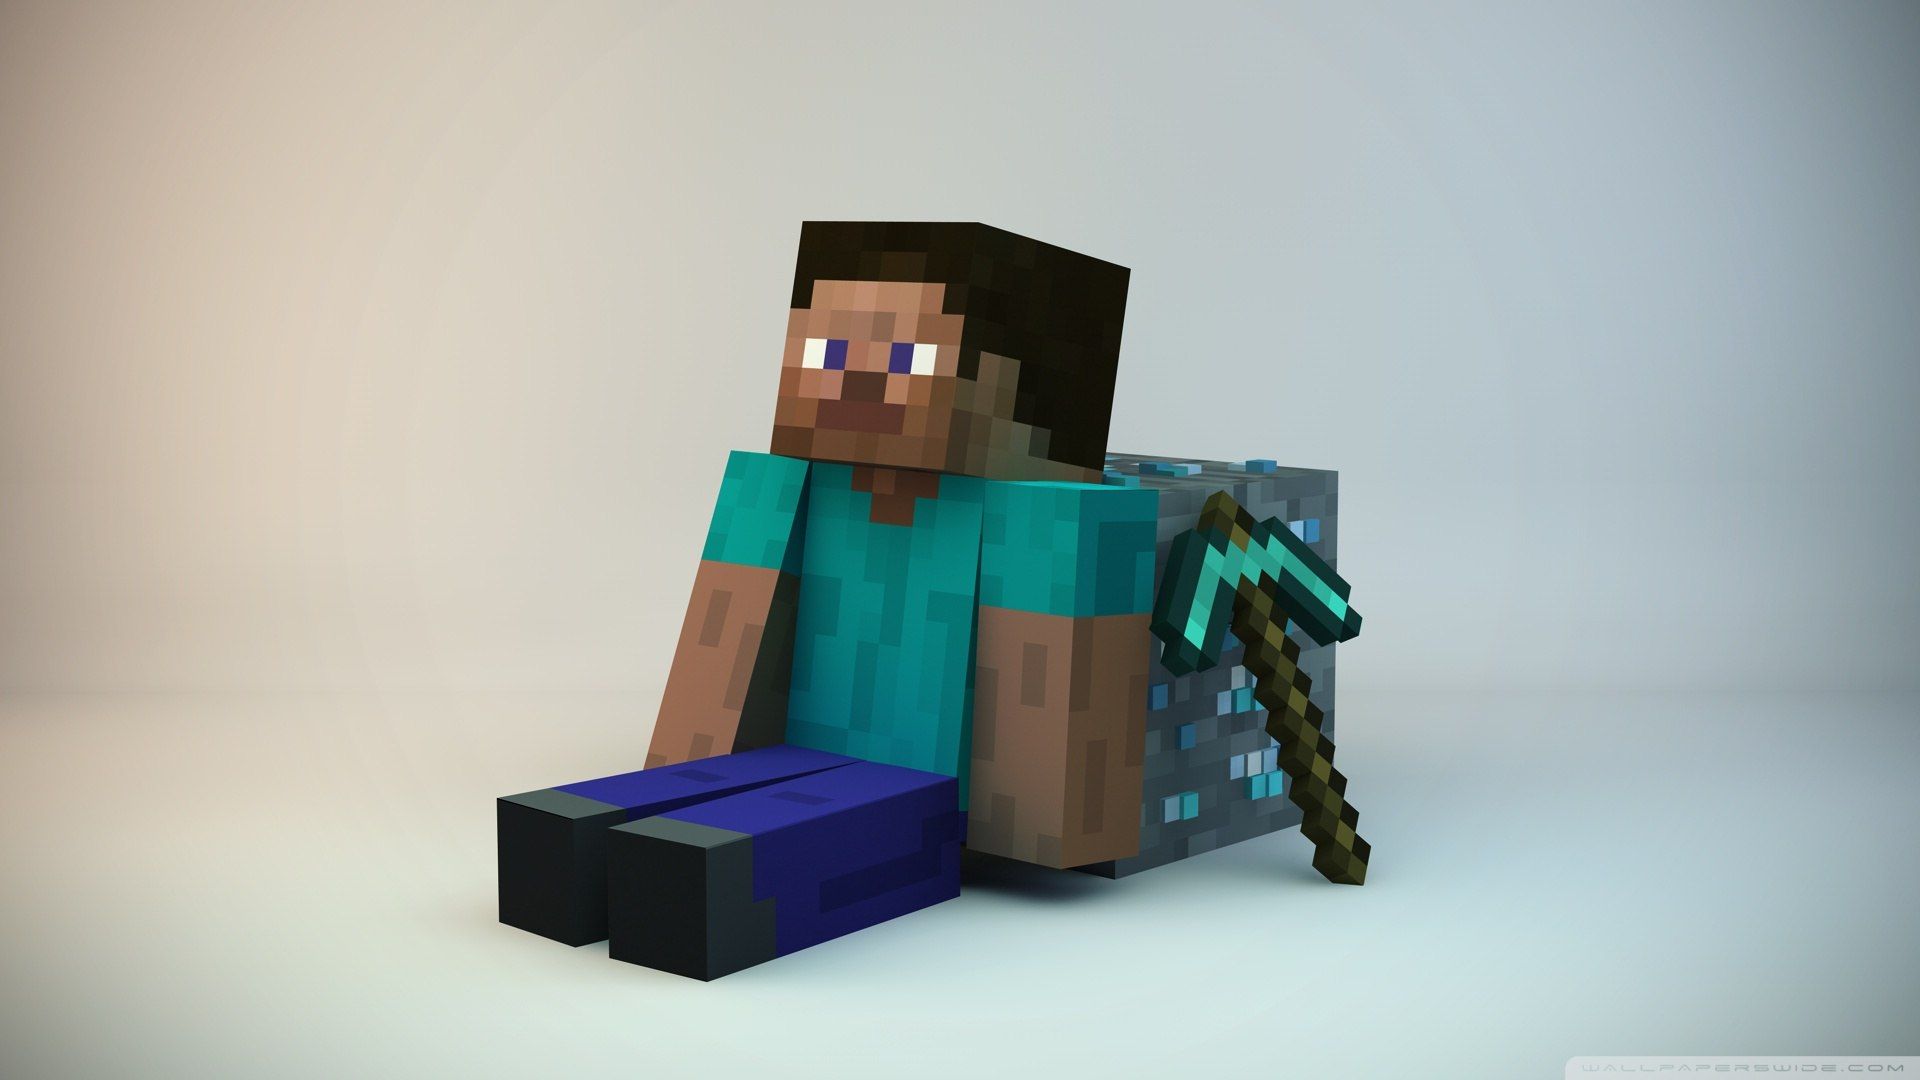 Minecraft wallpaper 1920x1080 - (#30305) - High Quality and ...